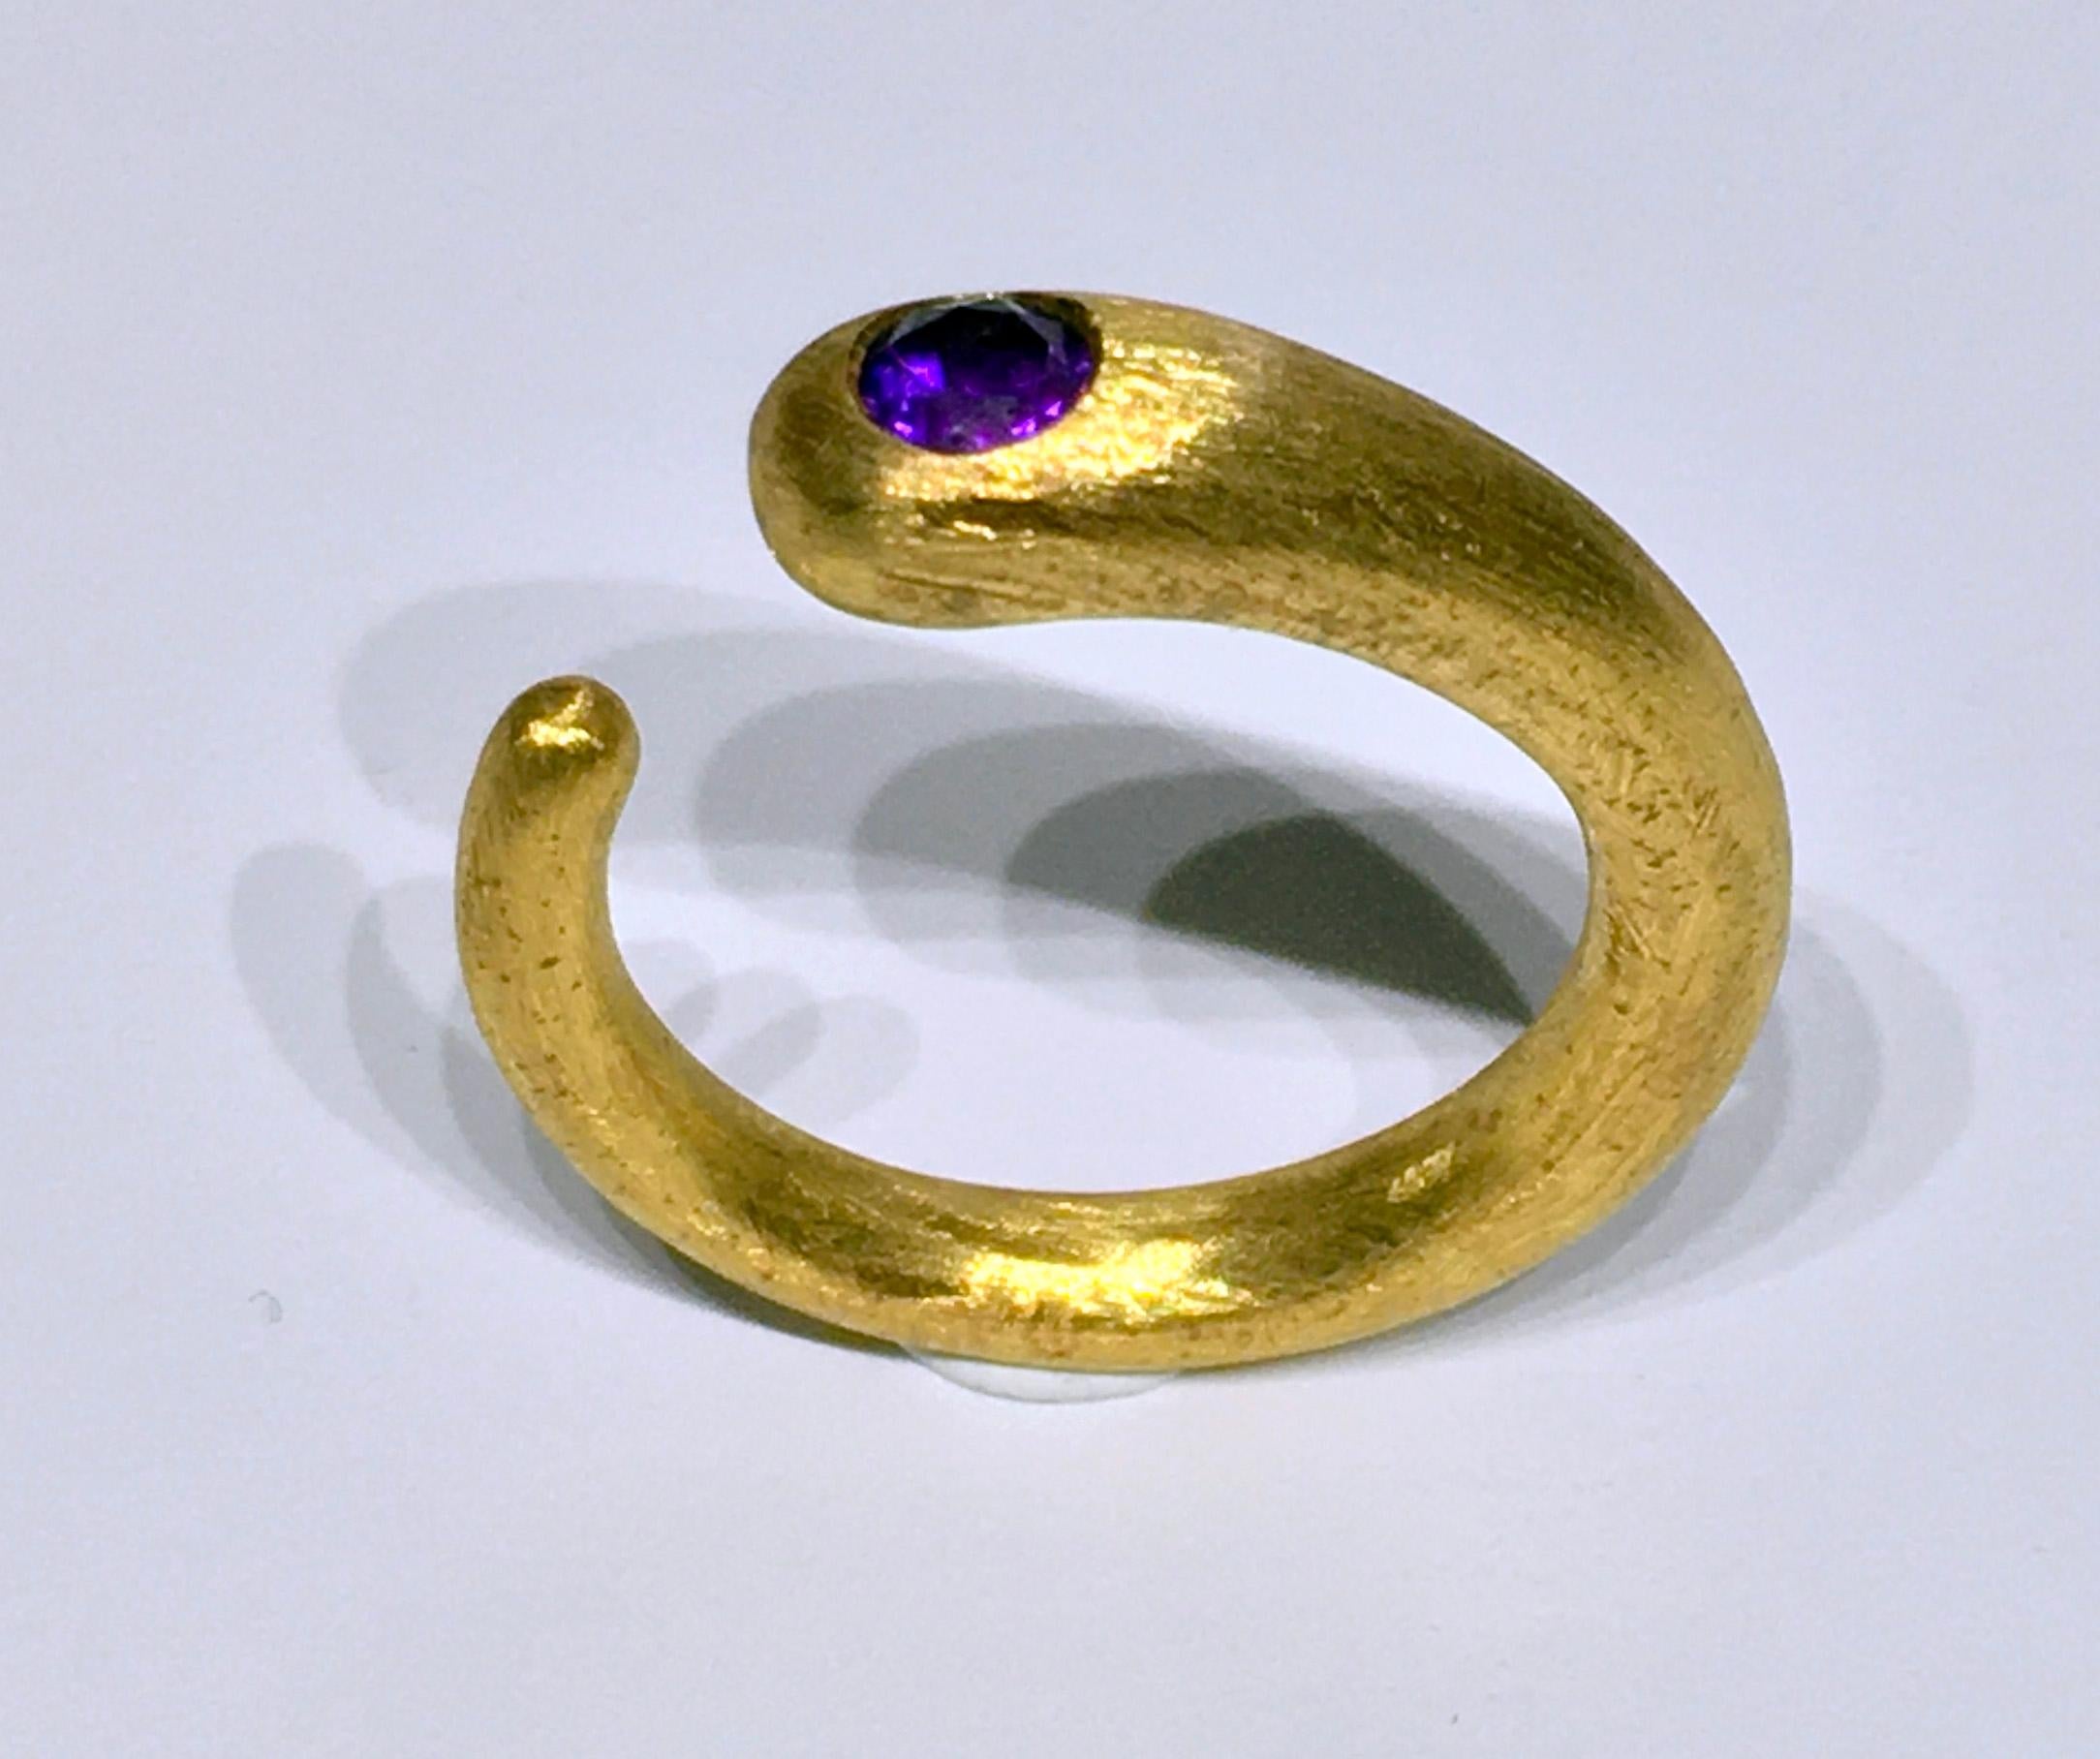 An 18kt Gold Plated Silver Ring, Set with an Amethyst with a Brushed Finish. The Ring is a size 7.25 US and is Curl Style, to easily adjust to a similar ring size. This Ring is 6.5 Grams of Gold Plated Silver and set with a 0.34 Carat